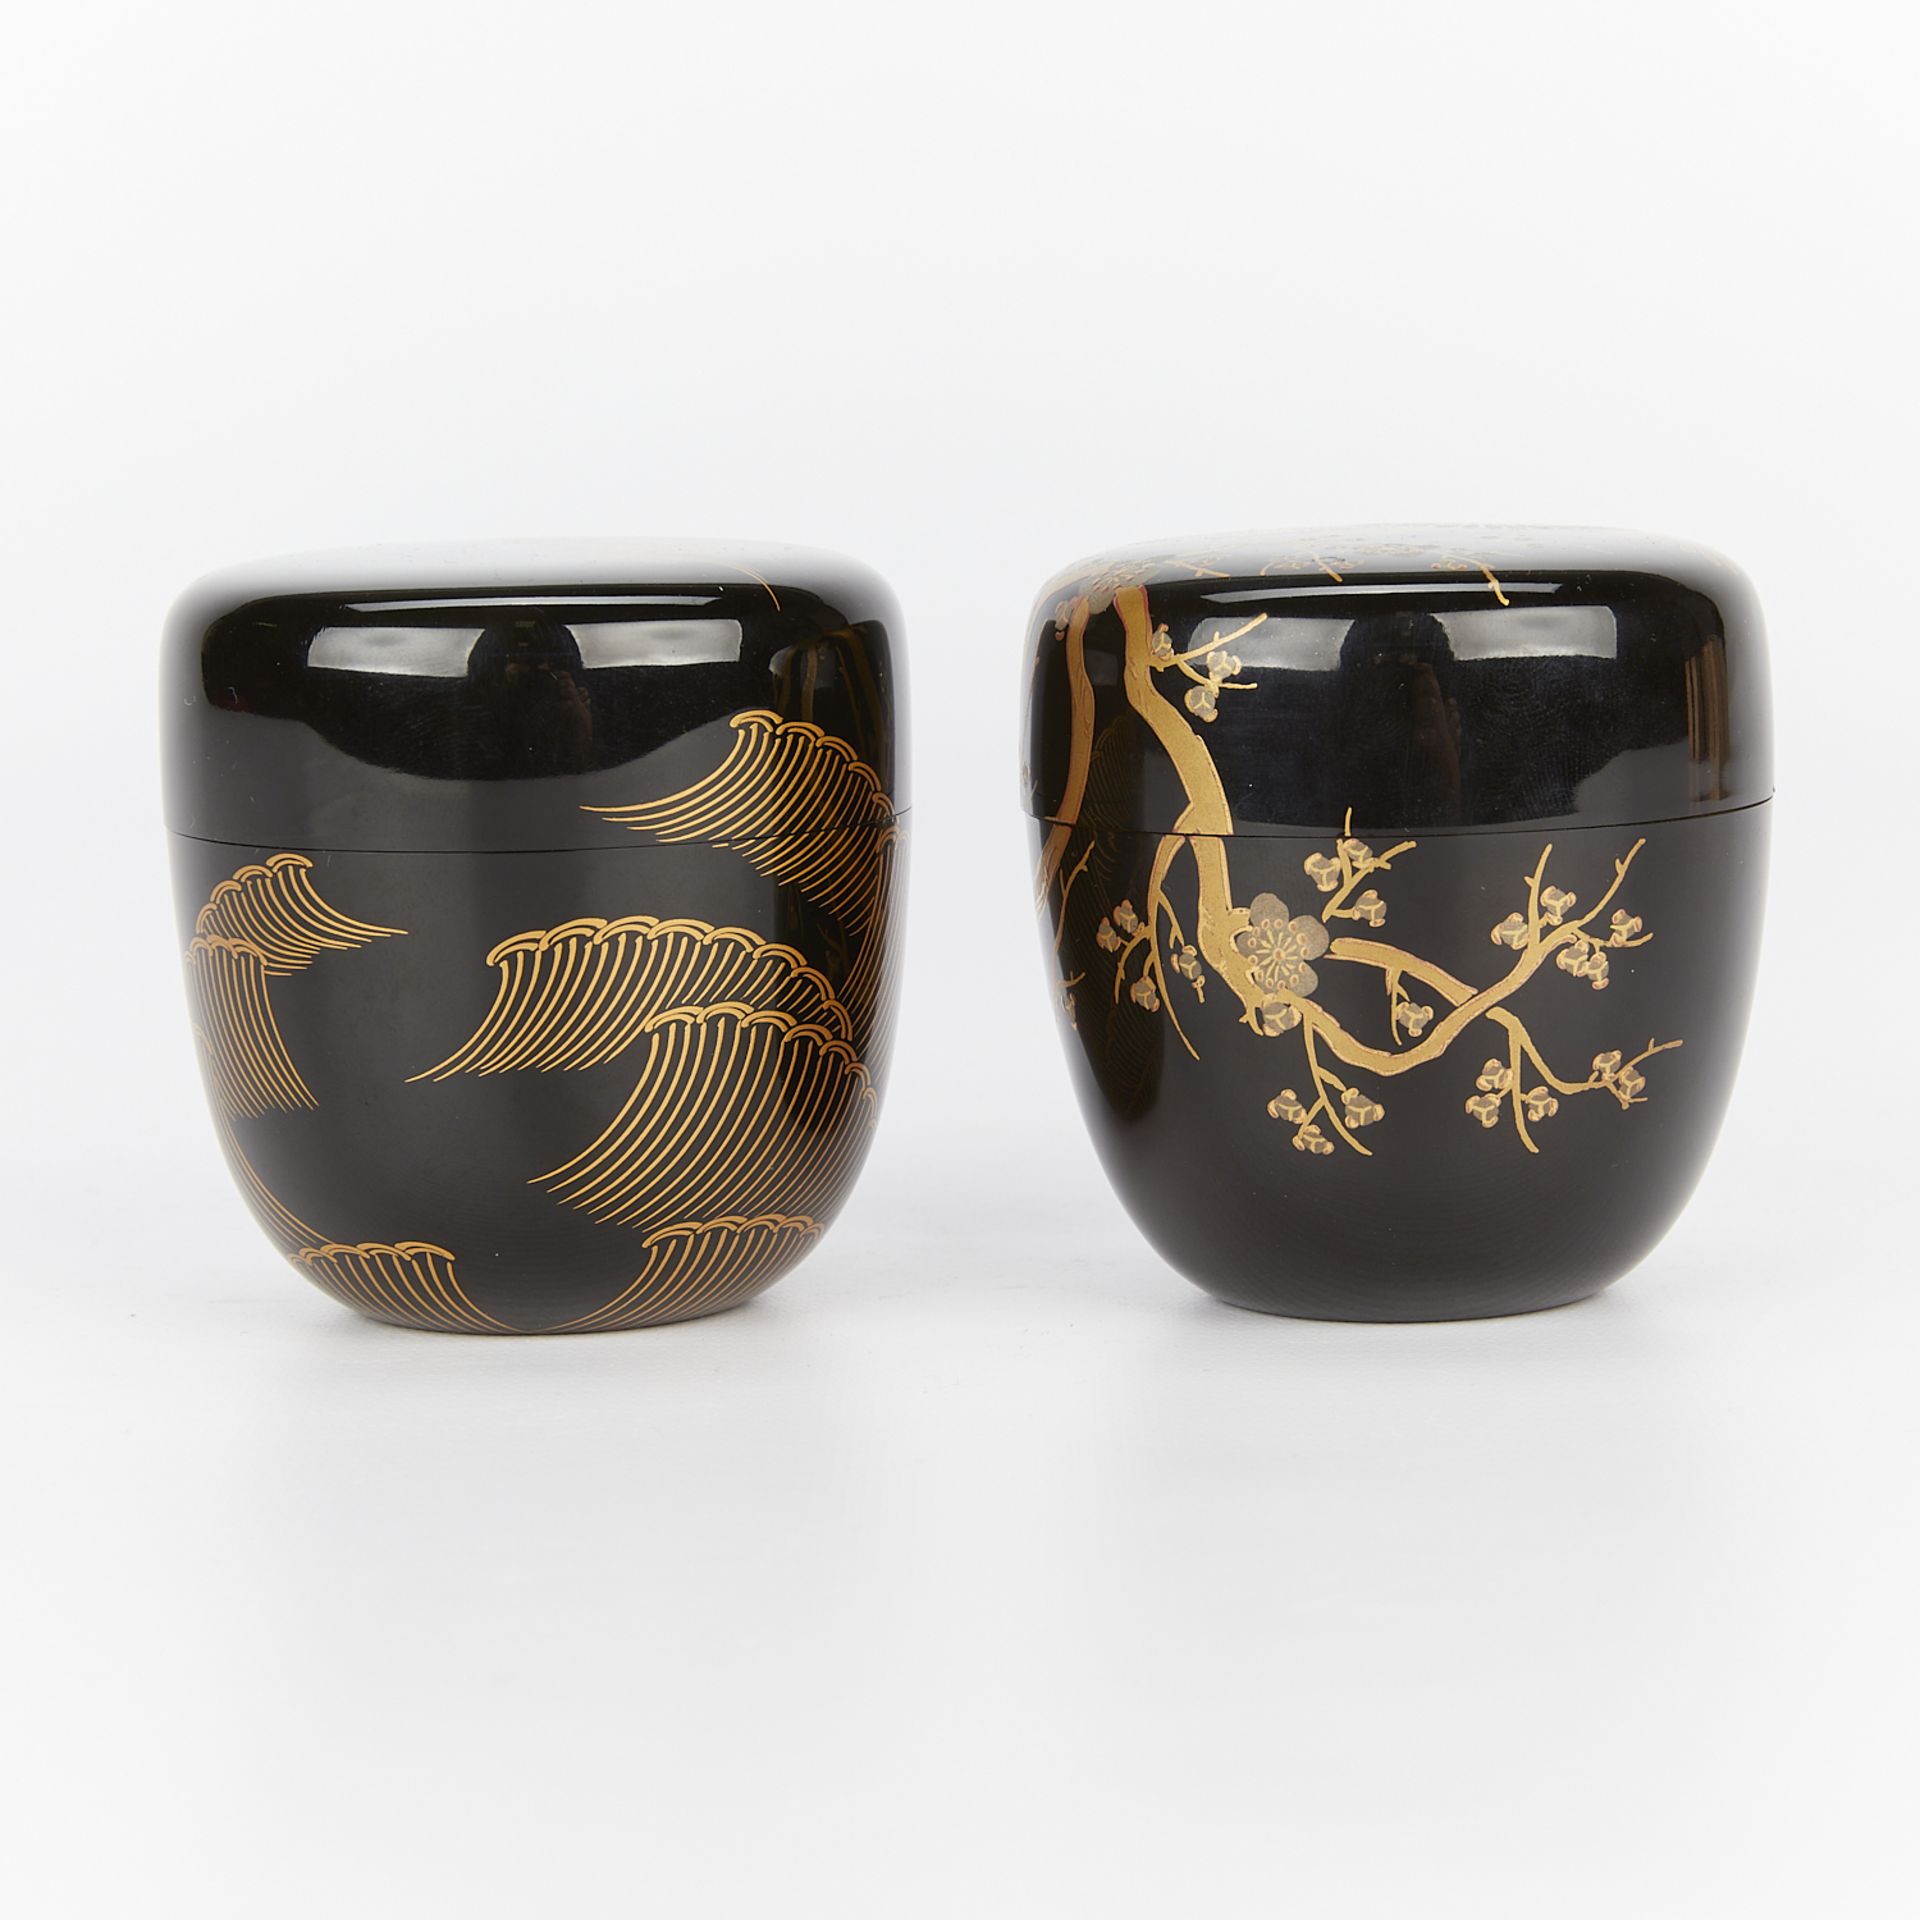 2 Japanese Natsume Tea Caddies in Boxes - Image 5 of 16